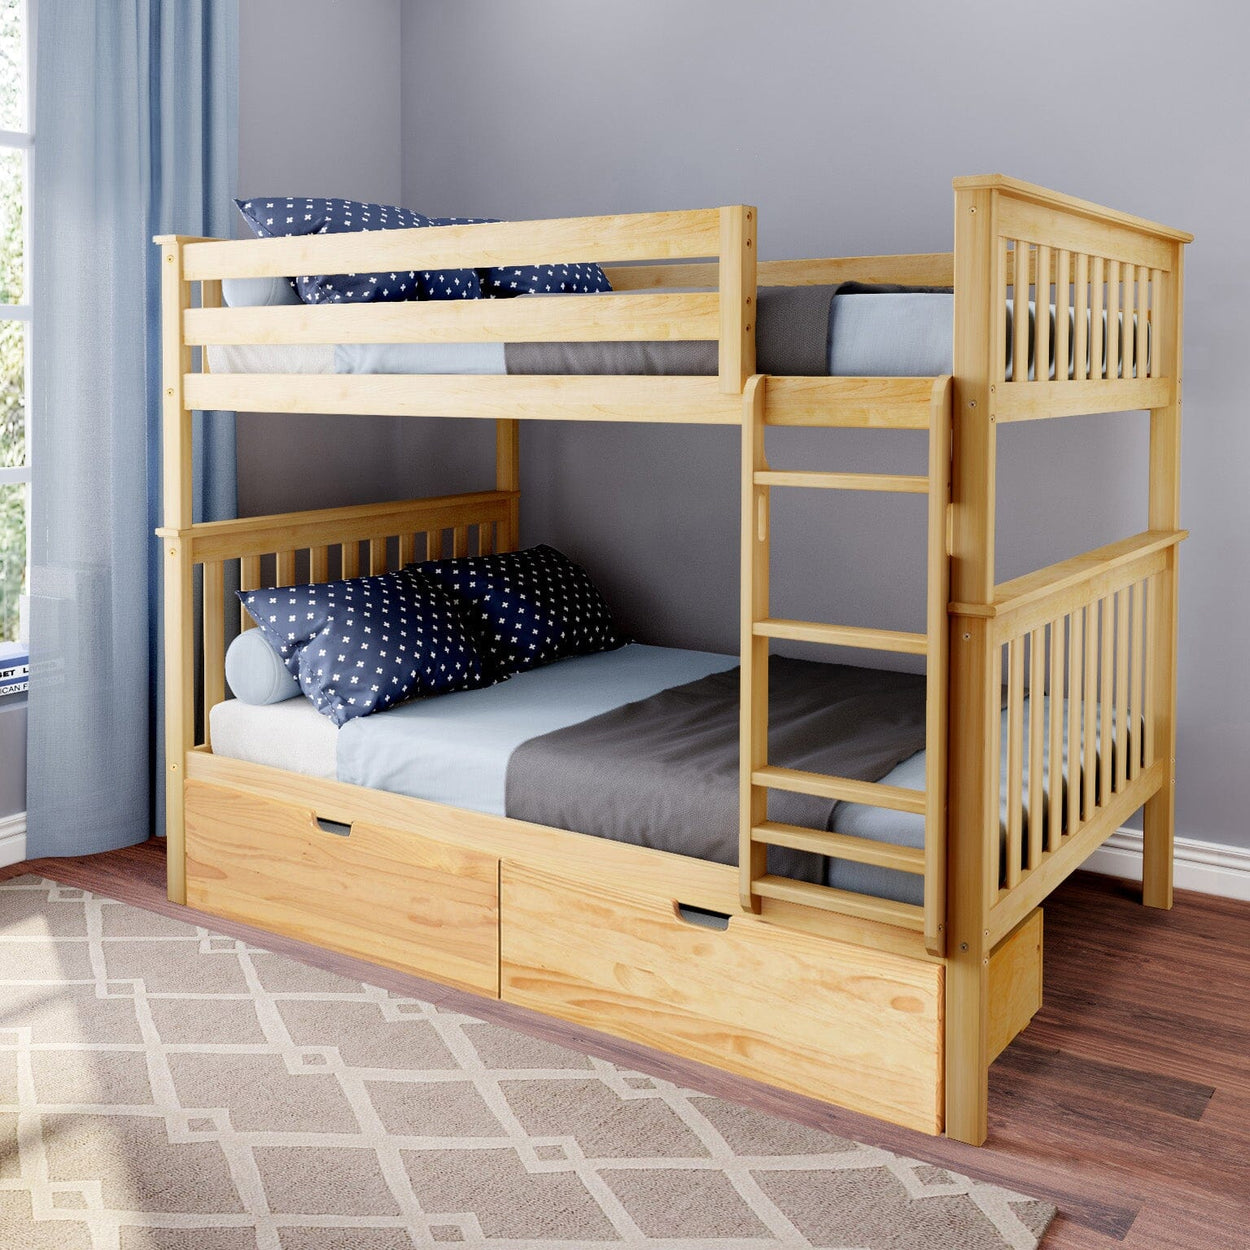 Bunk Beds Max & Lily Full over Full Bunk Bed with Storage Drawers Natural 